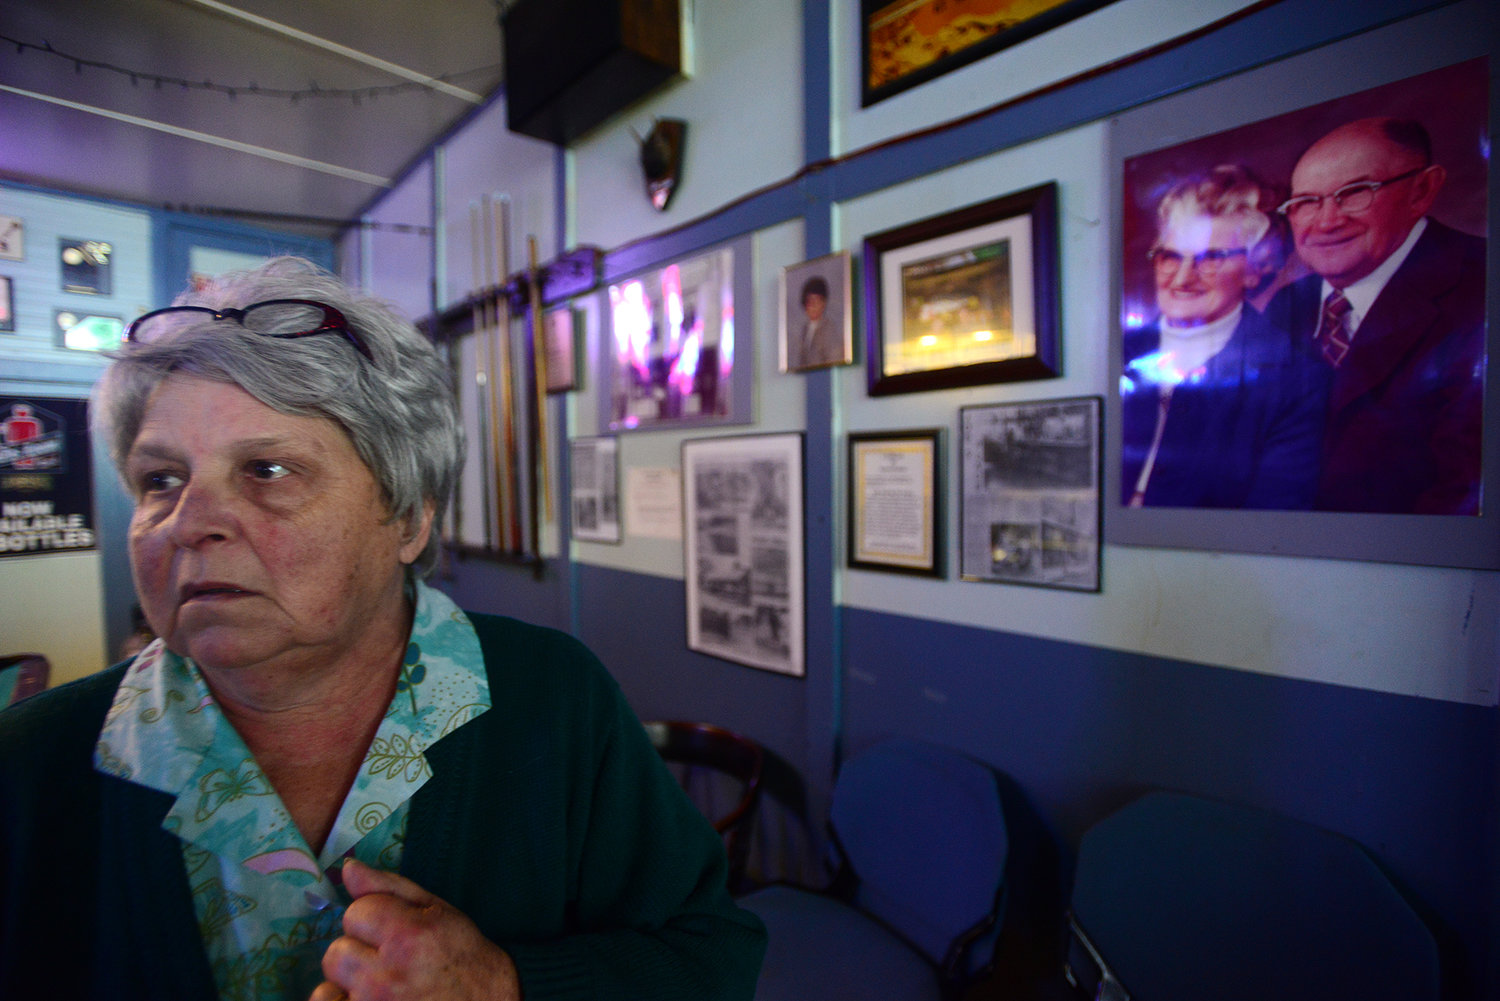 Judy Wall, the owner of Joe's Place in Bucoda, walks back towards the bar after showing the wall where pictures hang of the in-laws which owned and ran the bar since 1898.